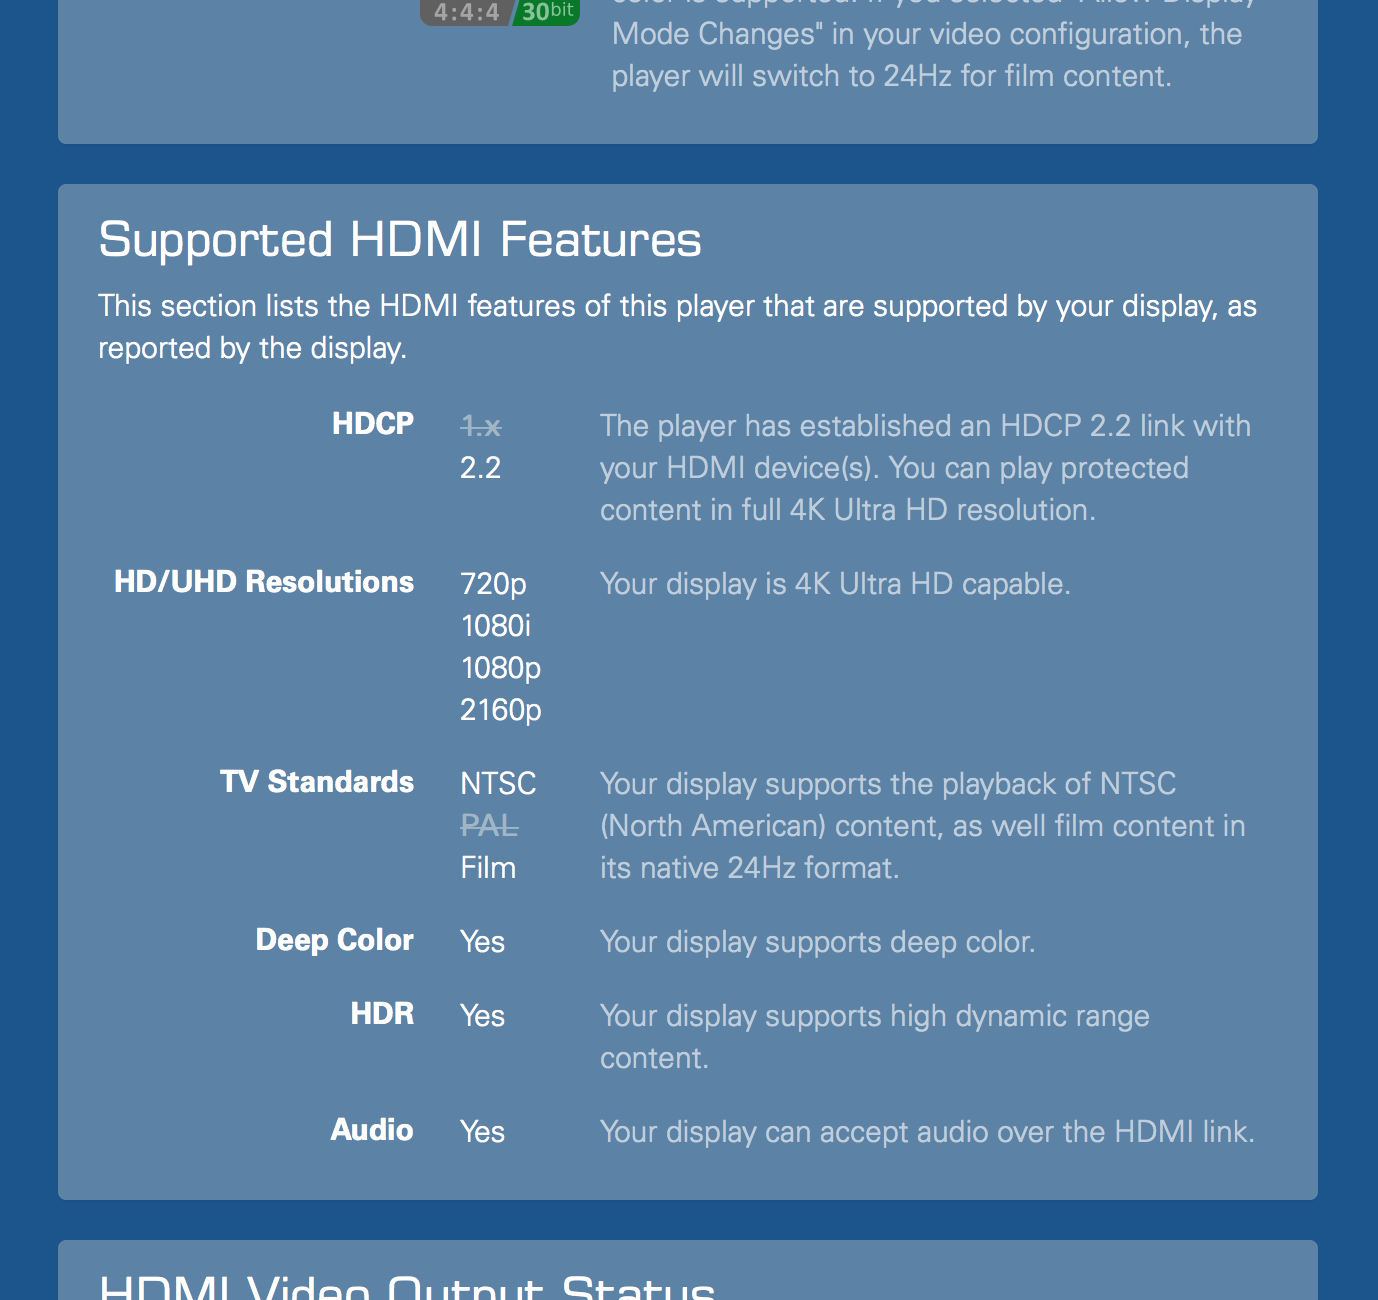 HDMI features